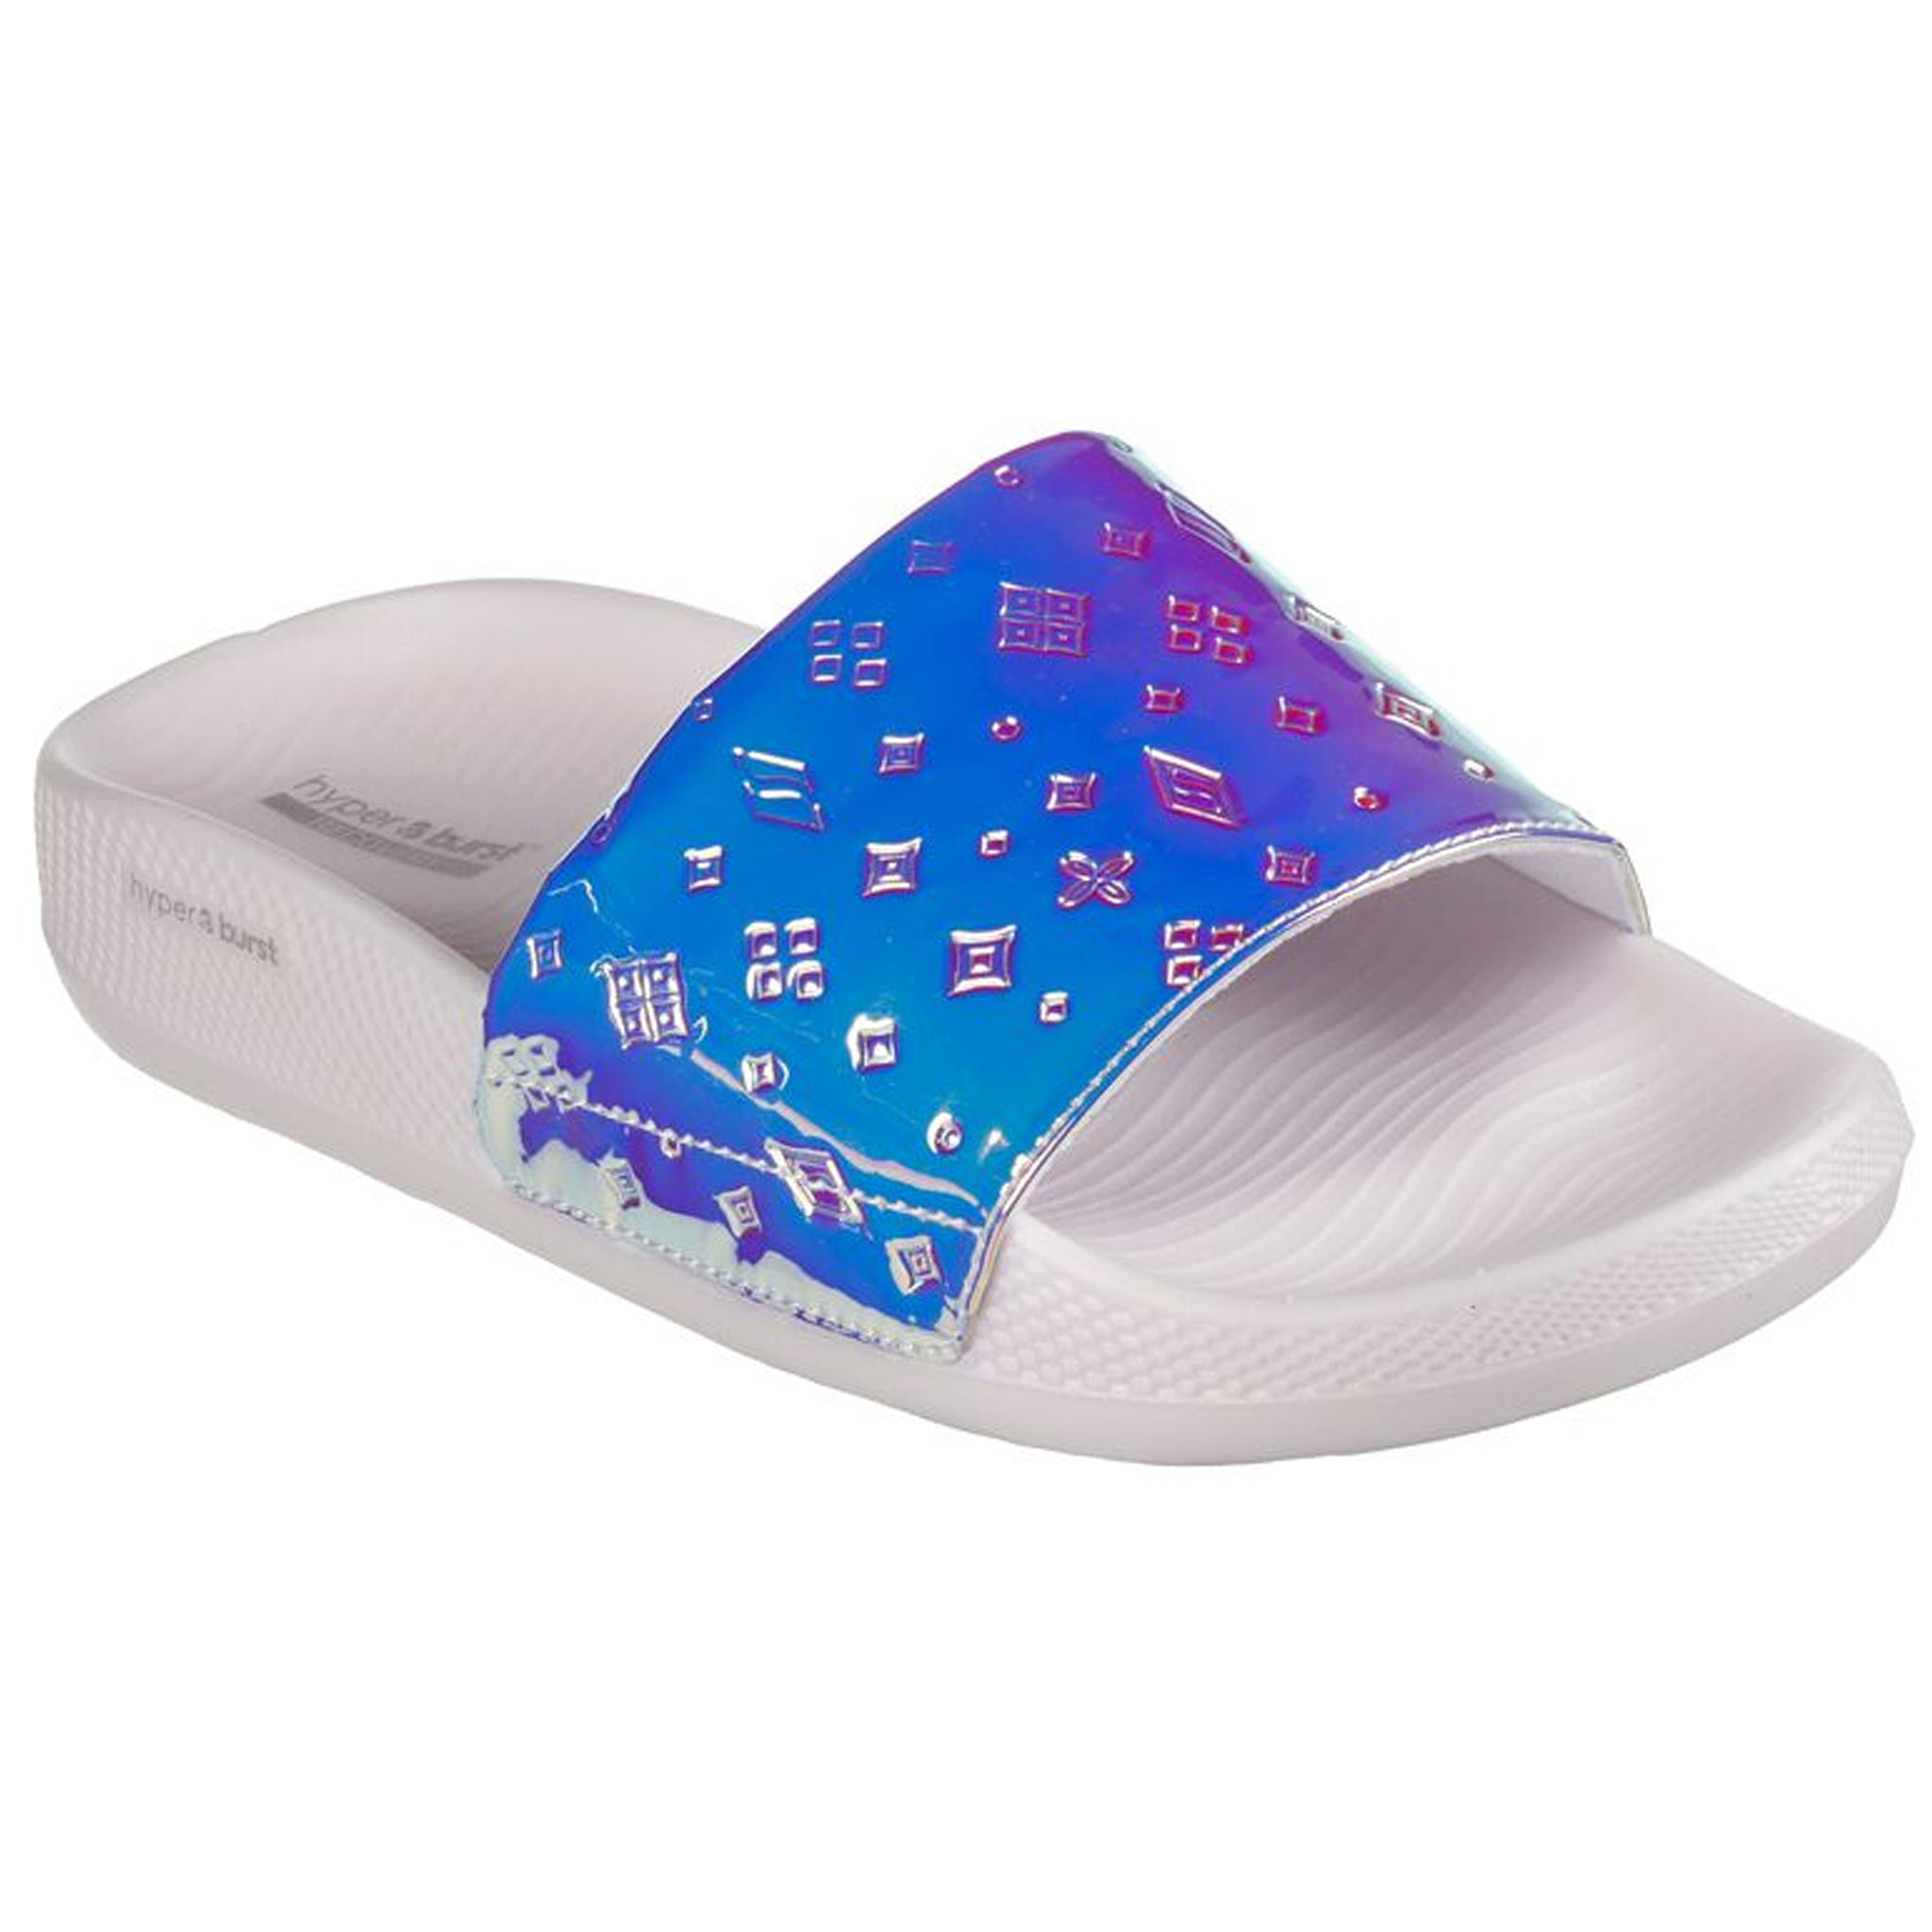 Skechers Women's Hyper - Top Side Sandals – That Shoe Store and More